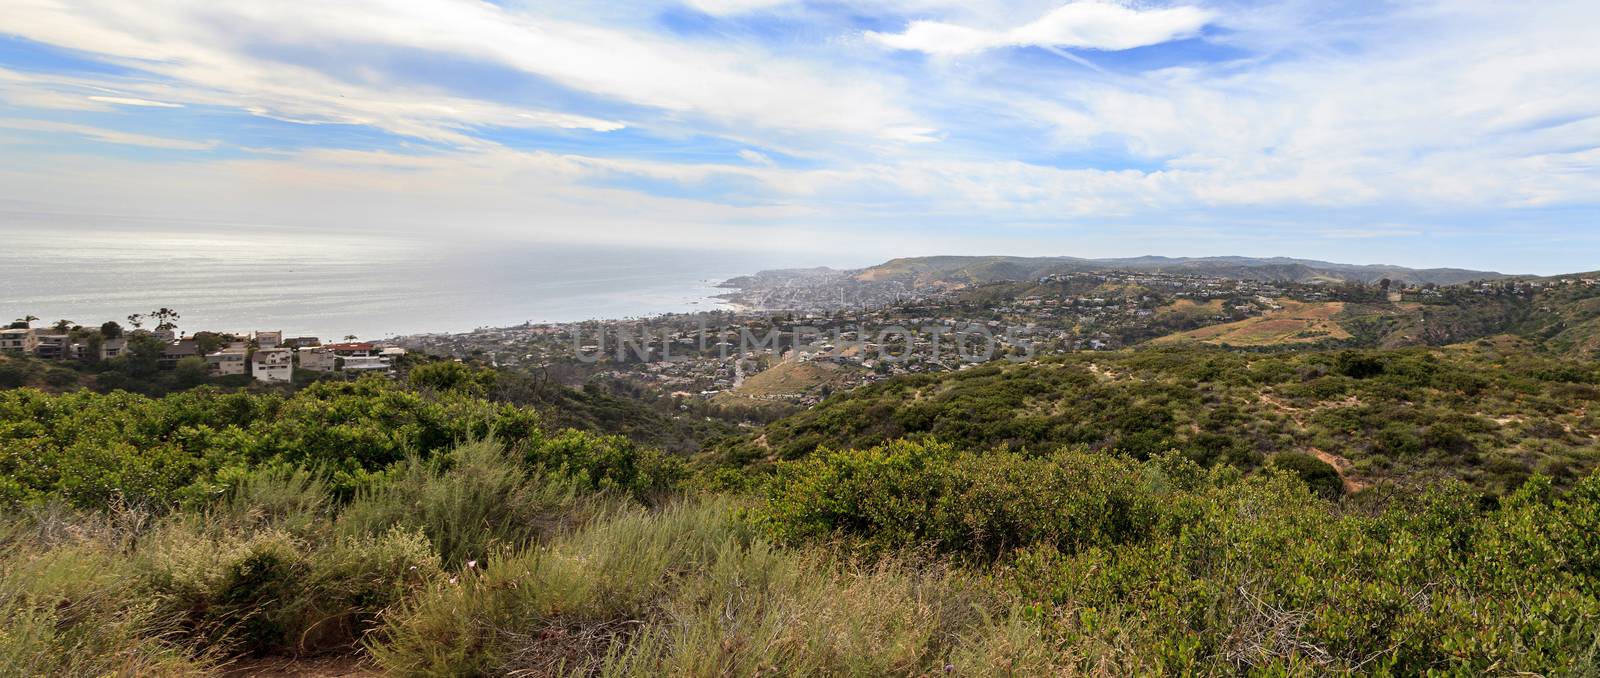 Aliso and Wood Canyons Wilderness Park hiking paths in Laguna Beach, California in spring